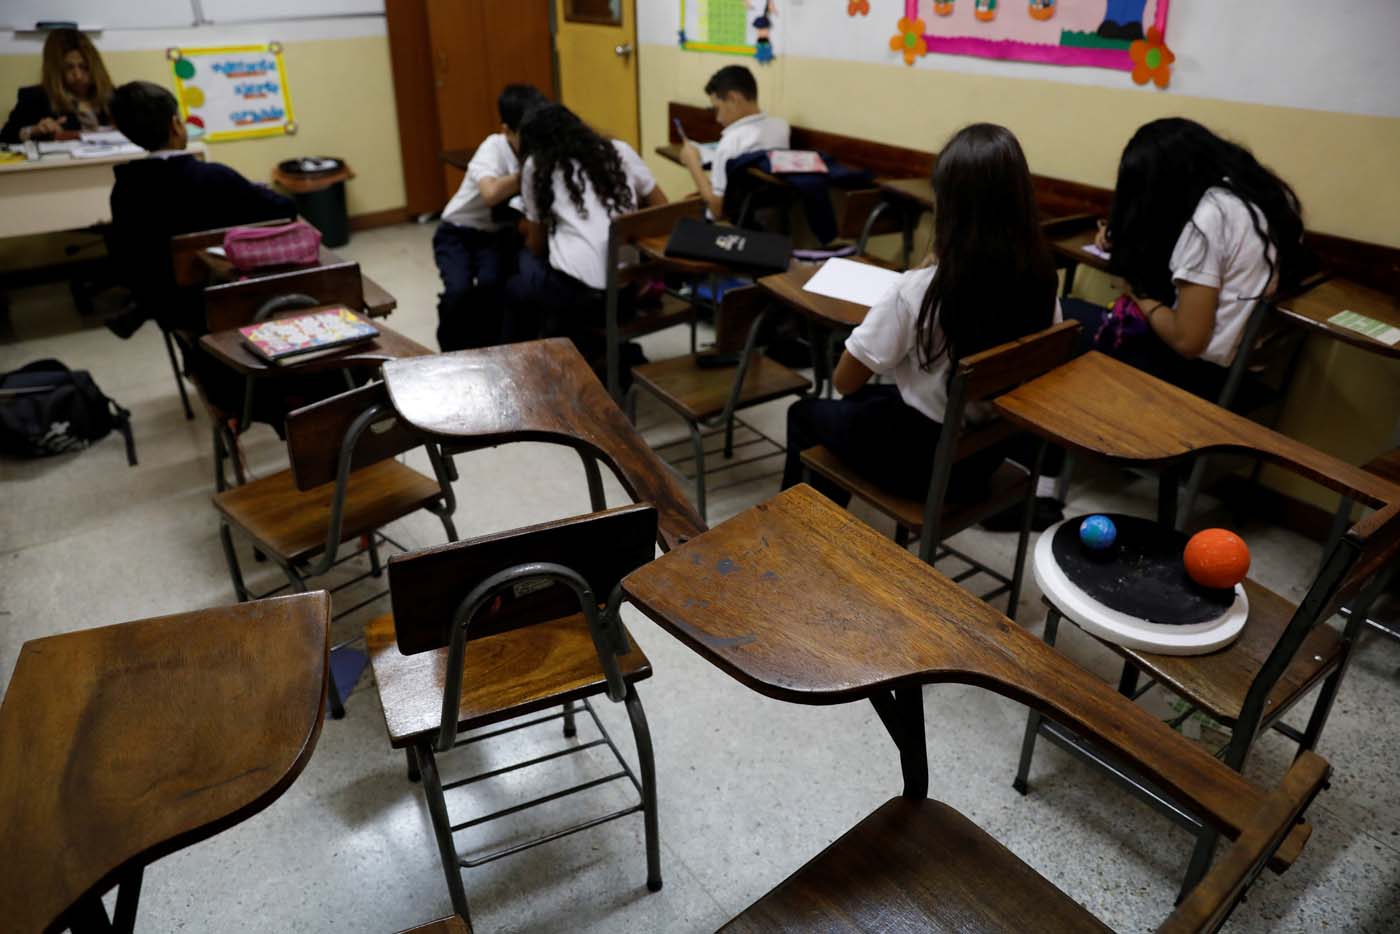 Empty desks are seen in the classroom of a school on a day of protests in Caracas, Venezuela June 14, 2017. Picture taken June 14, 2017. REUTERS/Carlos Garcia Rawlins